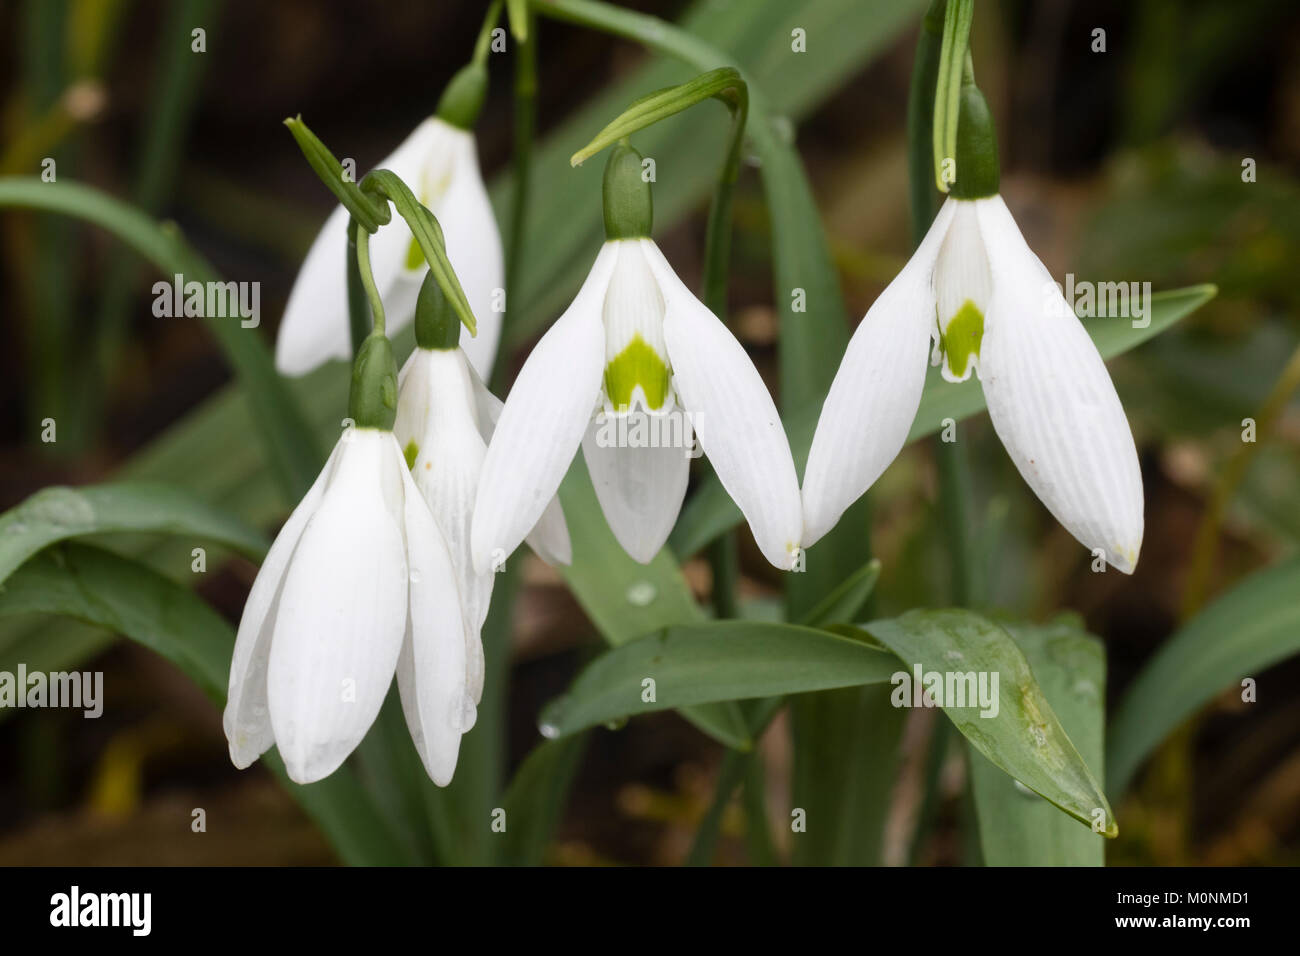 January flowers of the giant snowdrop variety, Galanthus elwesii 'Long Drop' Stock Photo